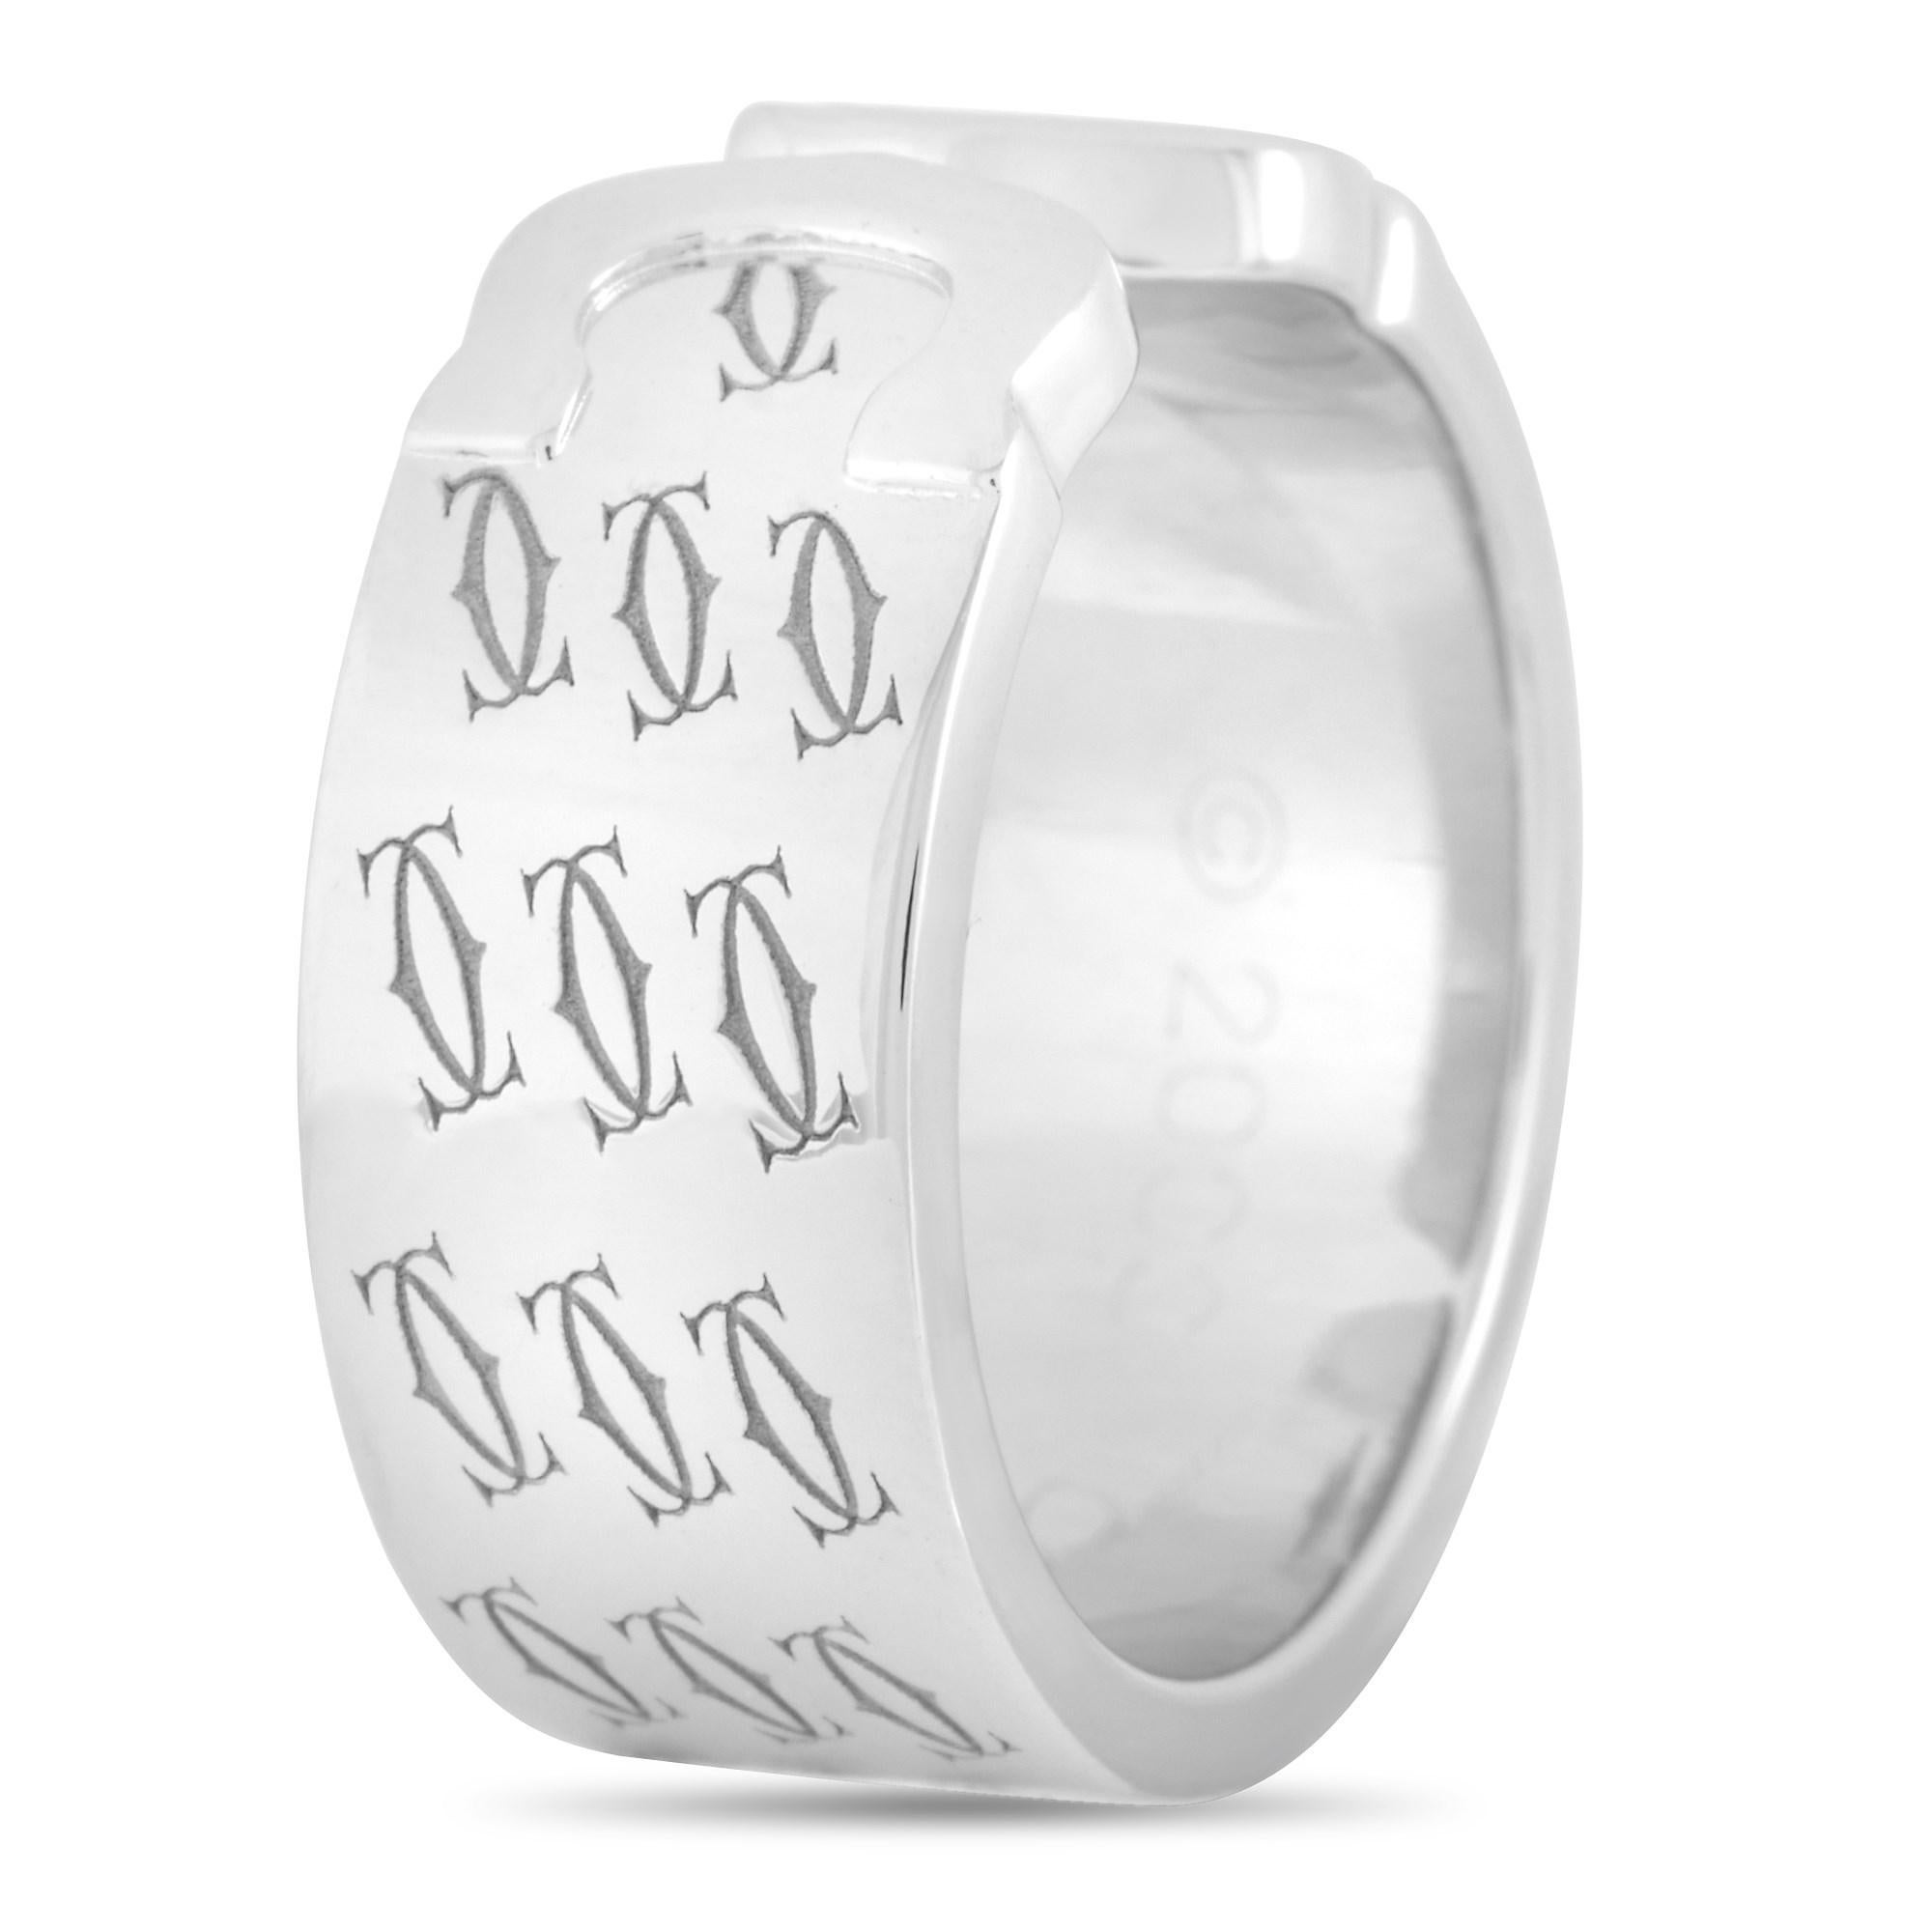 The Cartier Double C ring features a stylish pattern of 